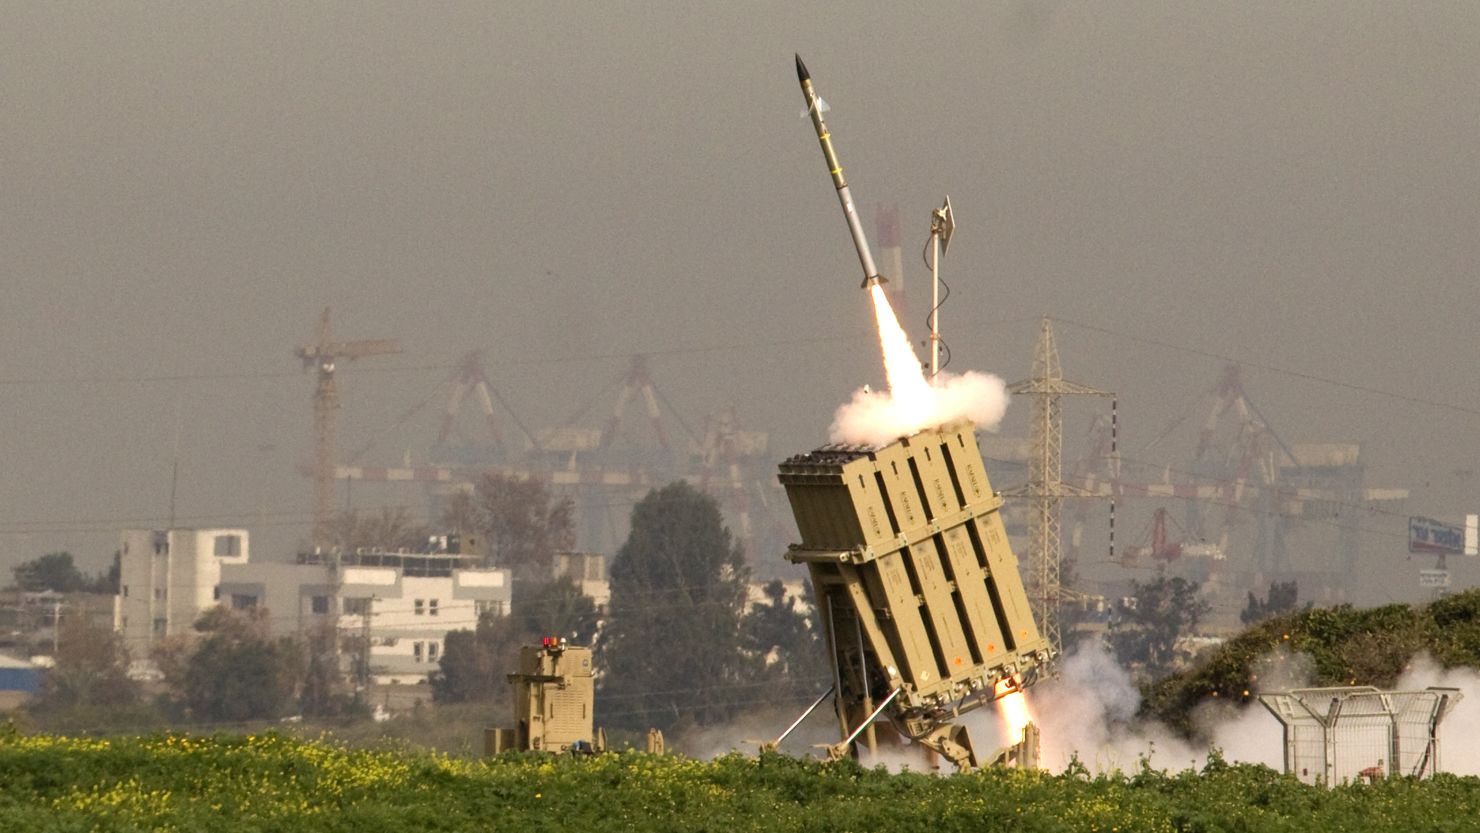 An Israeli missile is launched from the Iron Dome anti-rocket system in the city of Ashdod on Sunday.